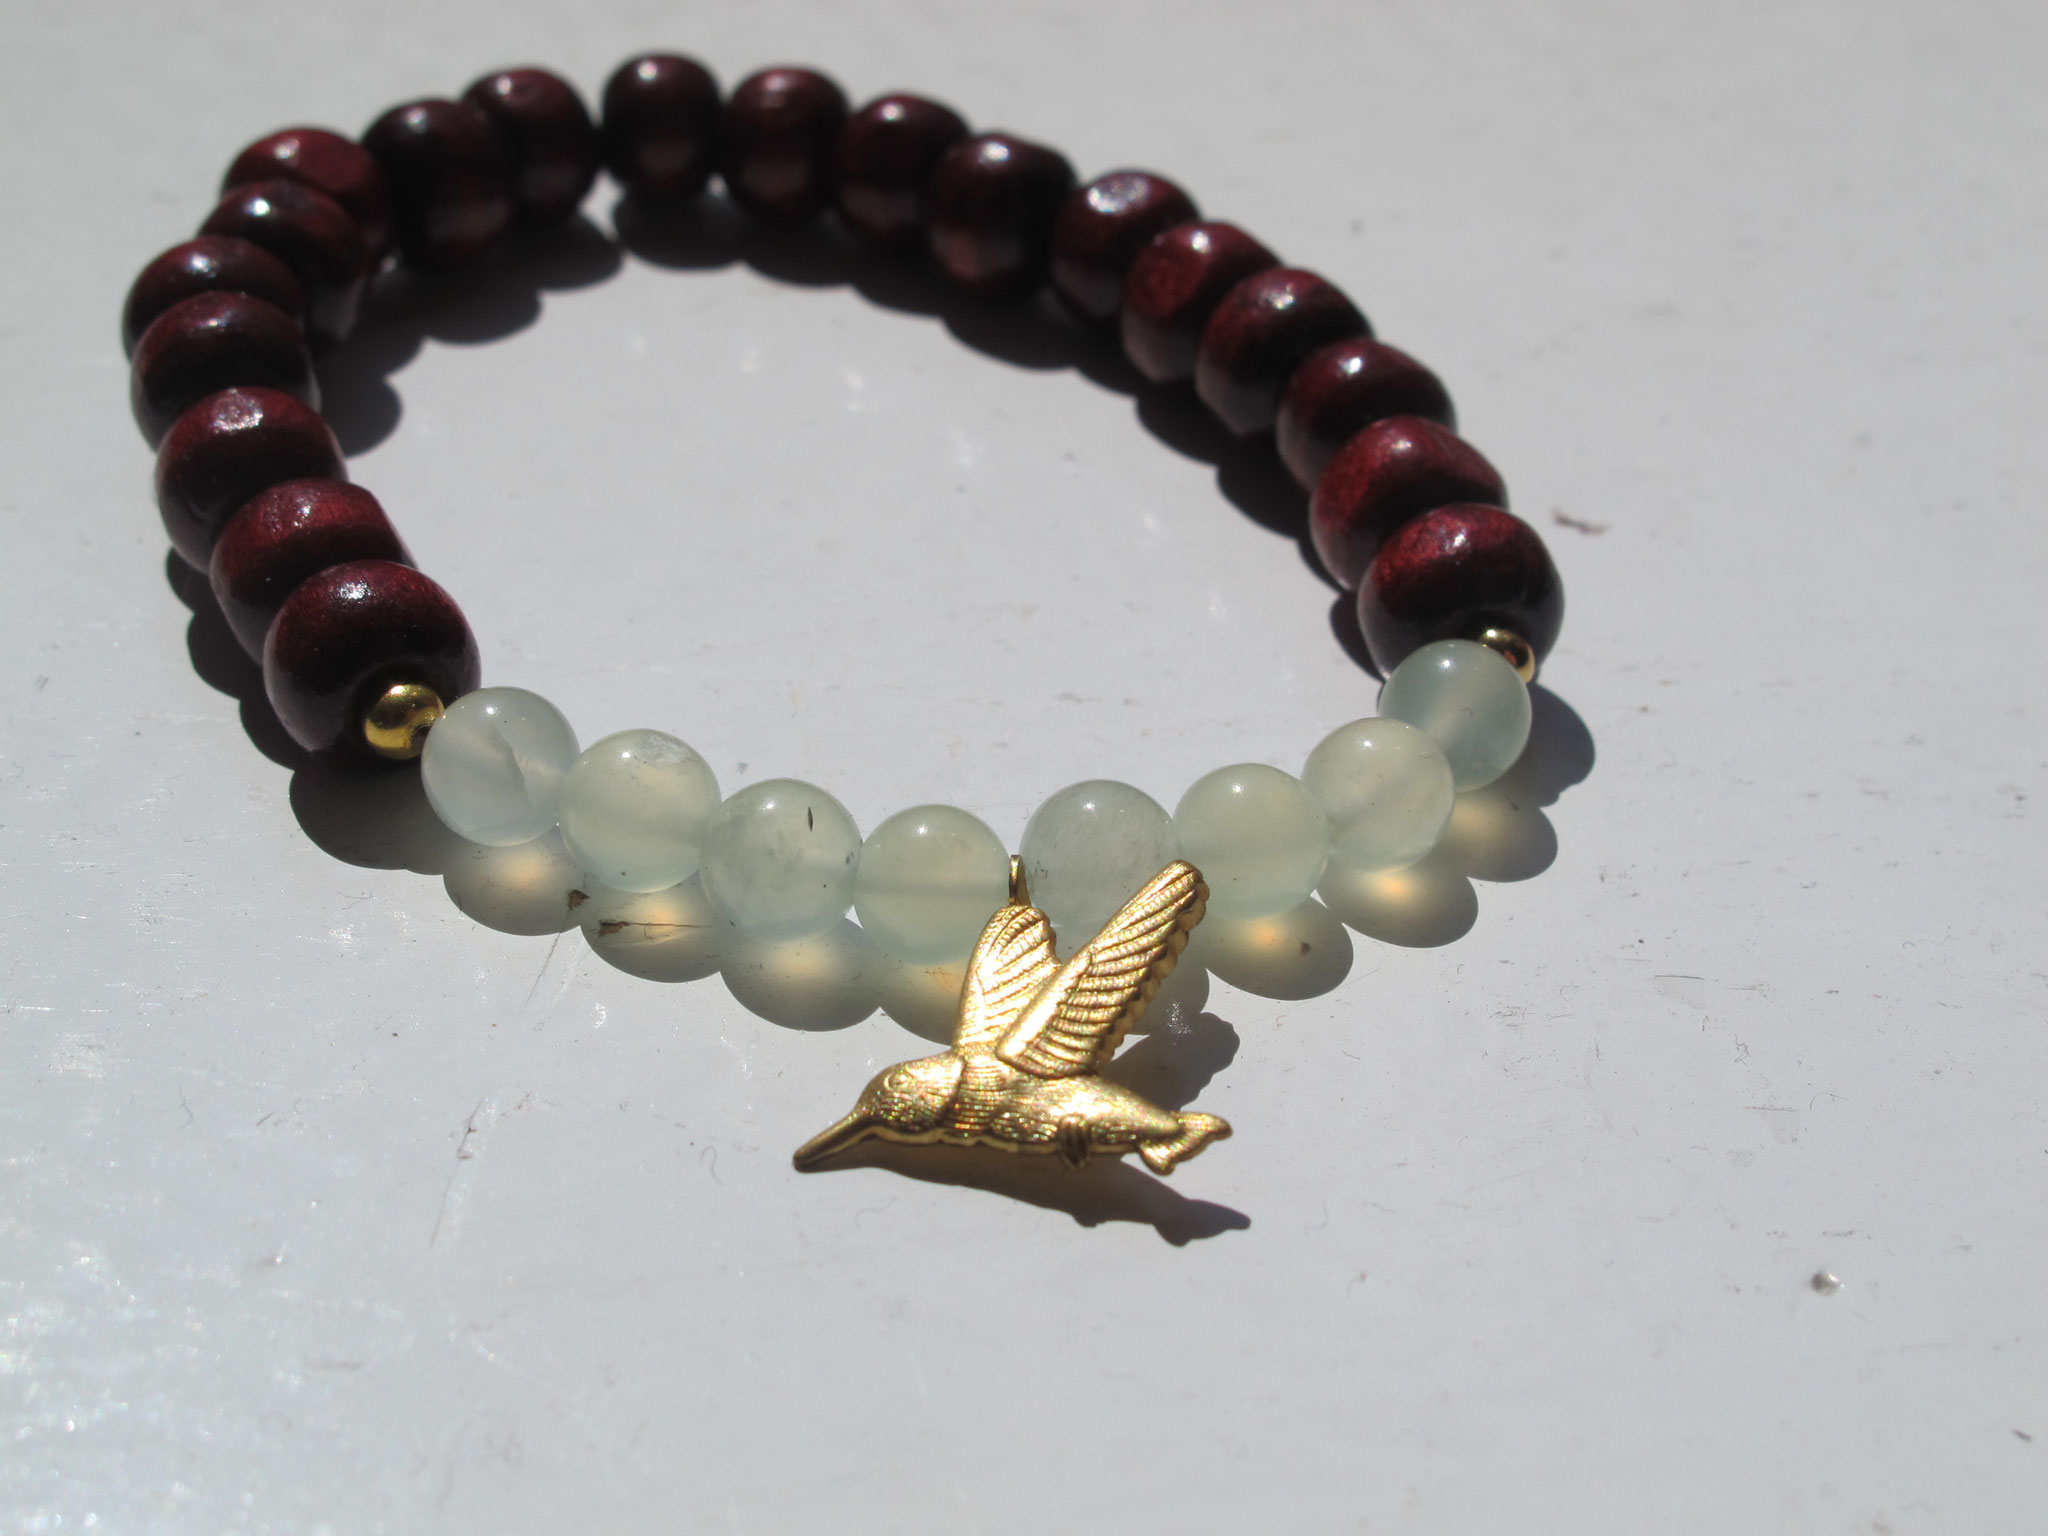 Serpentine with wood and a brass hummingbird charm